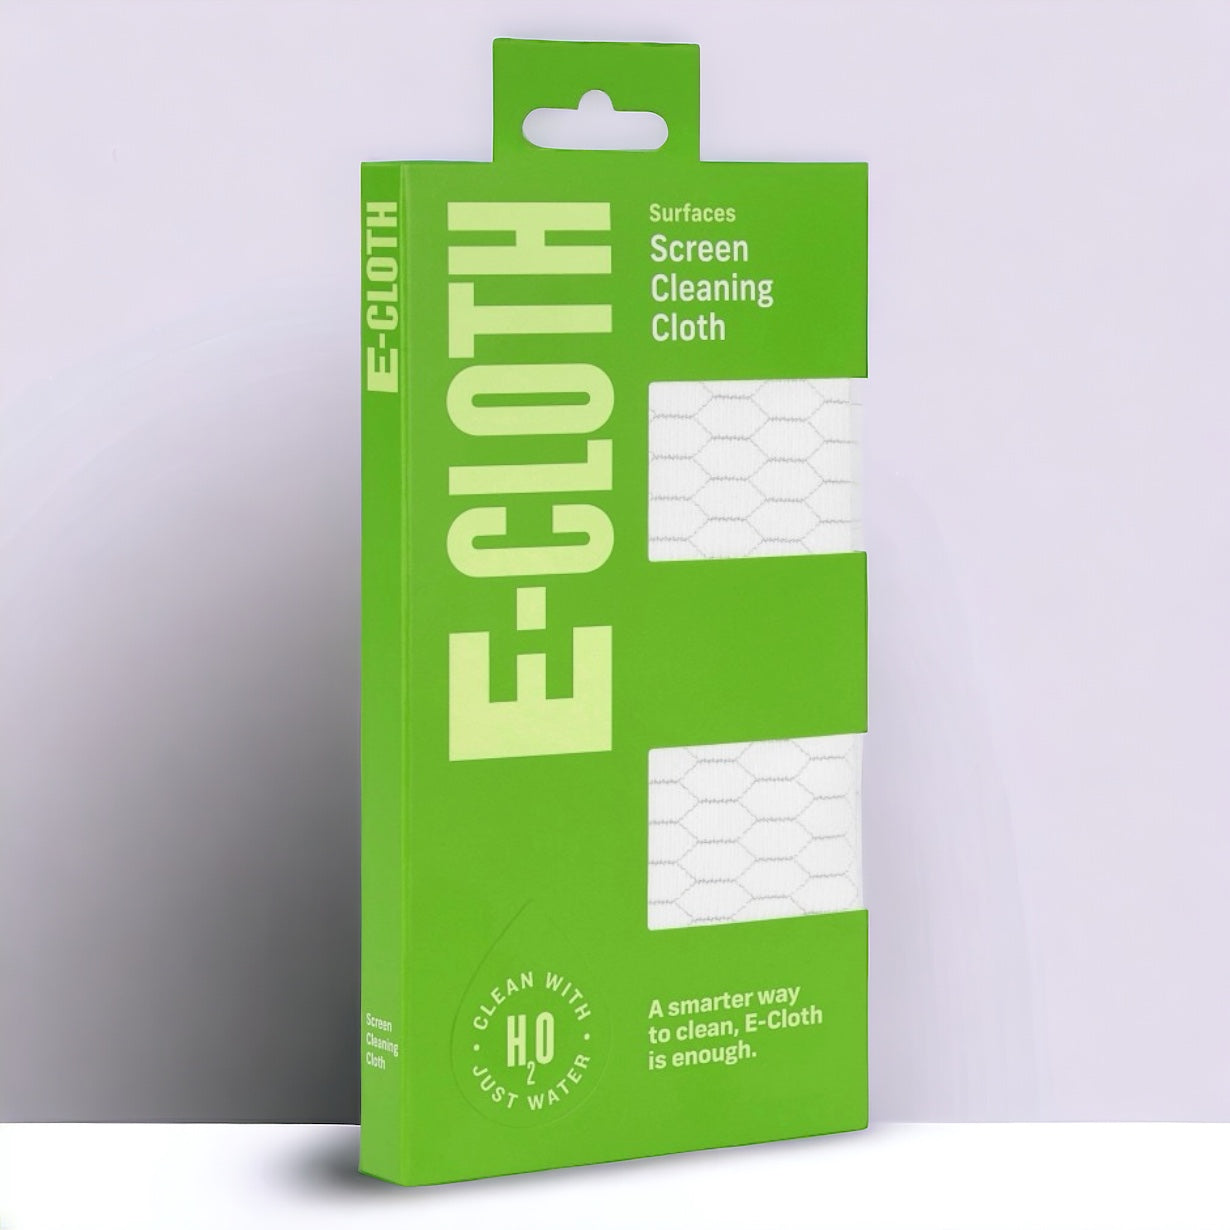 E-Cloth screen cleaning cloth in green package.